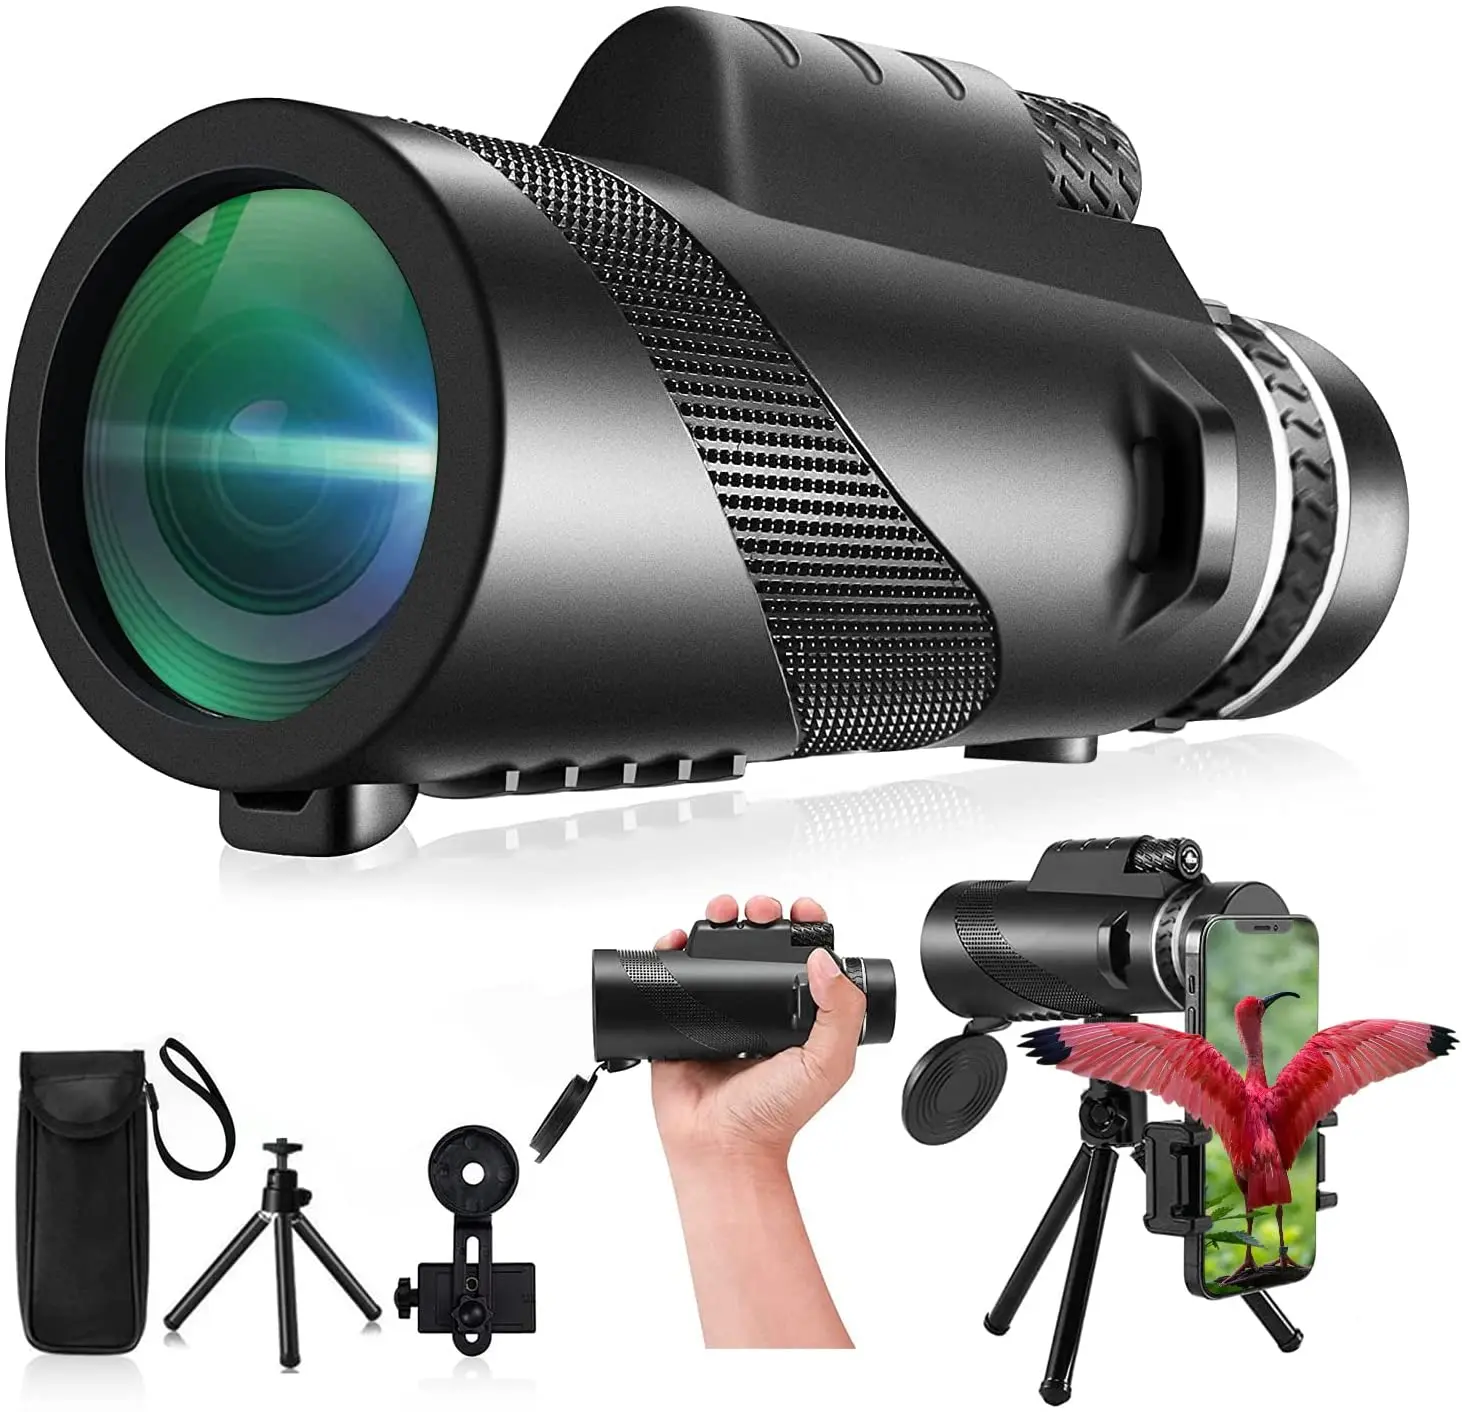 HD with Smartphone Adapter and Tripod,Suitable for Hunting,Scenic,Travel,Camping,Concert. Monoculars Telescope,12X50 High-Power Monocular with All Optical Glass Lenses,Waterproof Anti Fog 